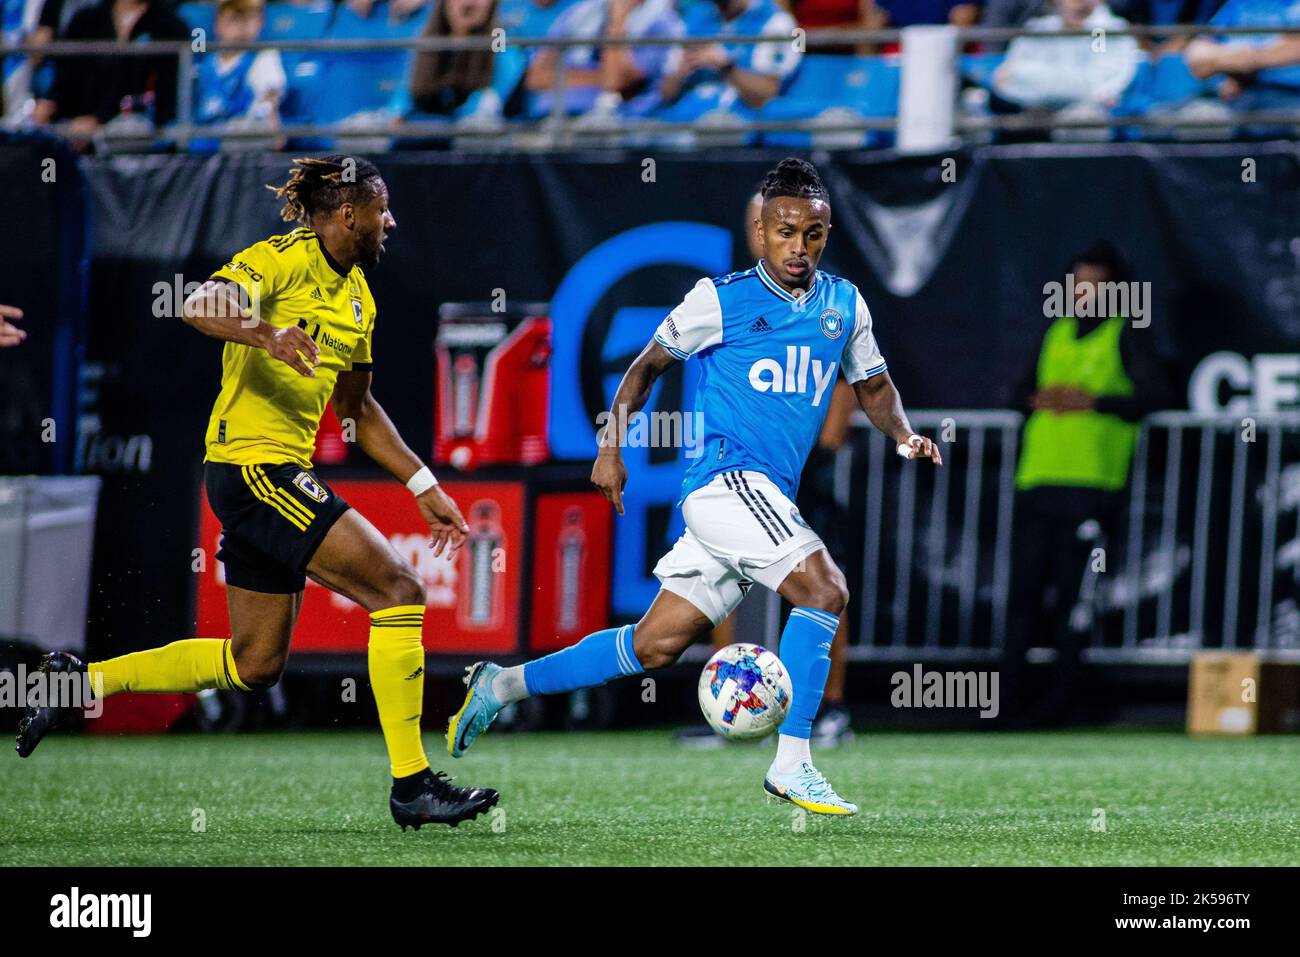 Charlotte, NC, USA. 5th Oct, 2022. Columbus Crew defender Steven Moreira (31) chases down Charlotte FC forward Yordi Reyna (26) during the first half of the Major League Soccer match up at Bank of America Stadium in Charlotte, NC. (Scott KinserCal Sport Media). Credit: csm/Alamy Live News Stock Photo